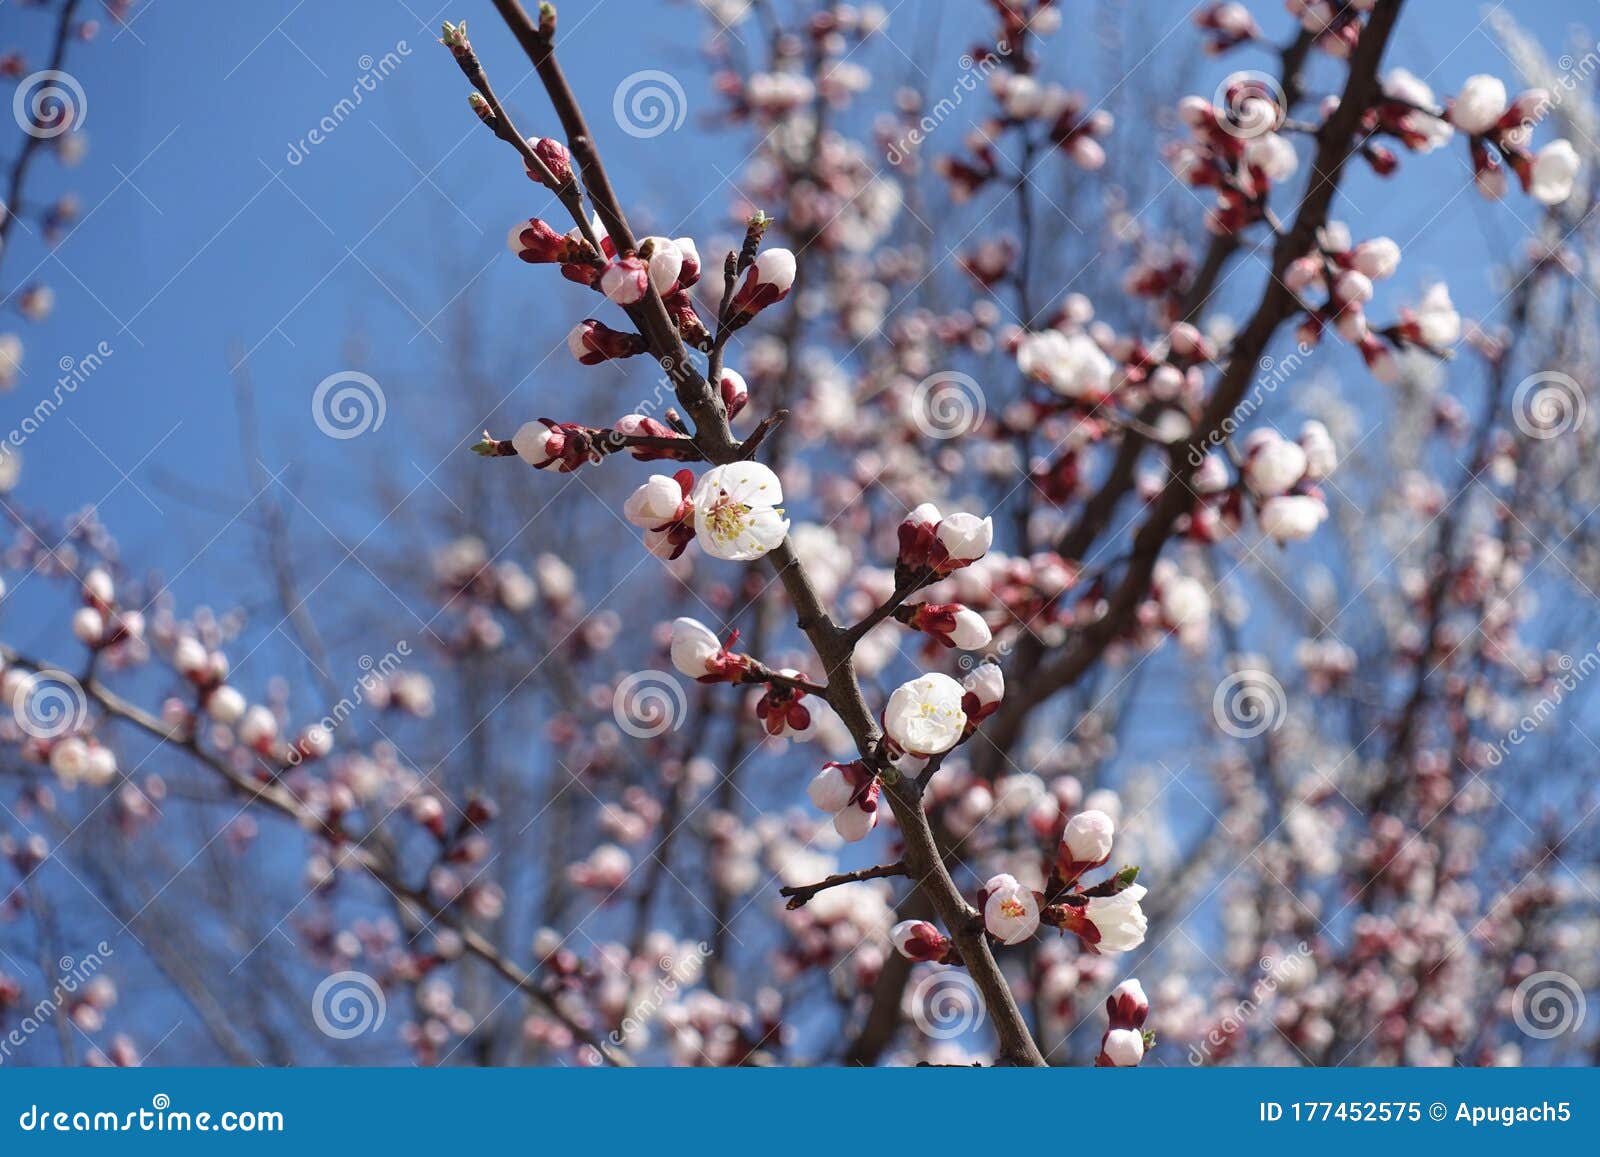 Bright Pinkish White Flowers Of Apricot Against Blue Sky In April Stock Image Image Of Naked Lush